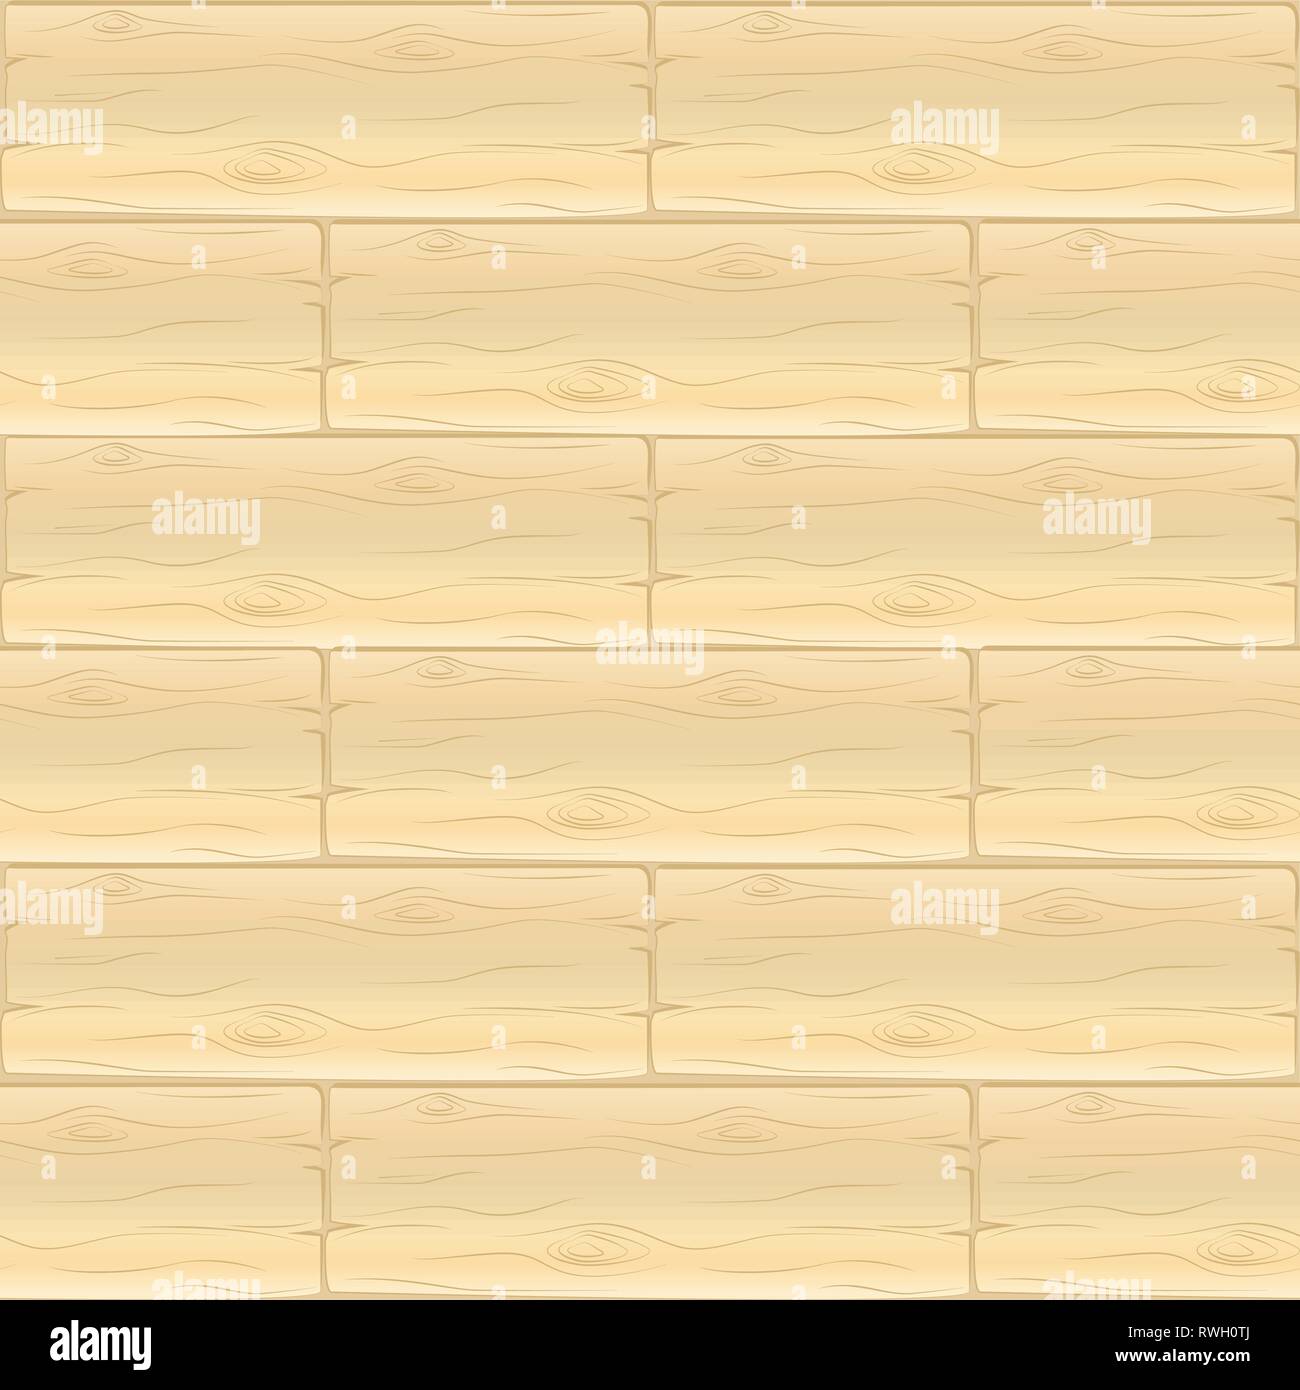 seamless pattern bright wood timber background vector illustration EPS10 Stock Vector